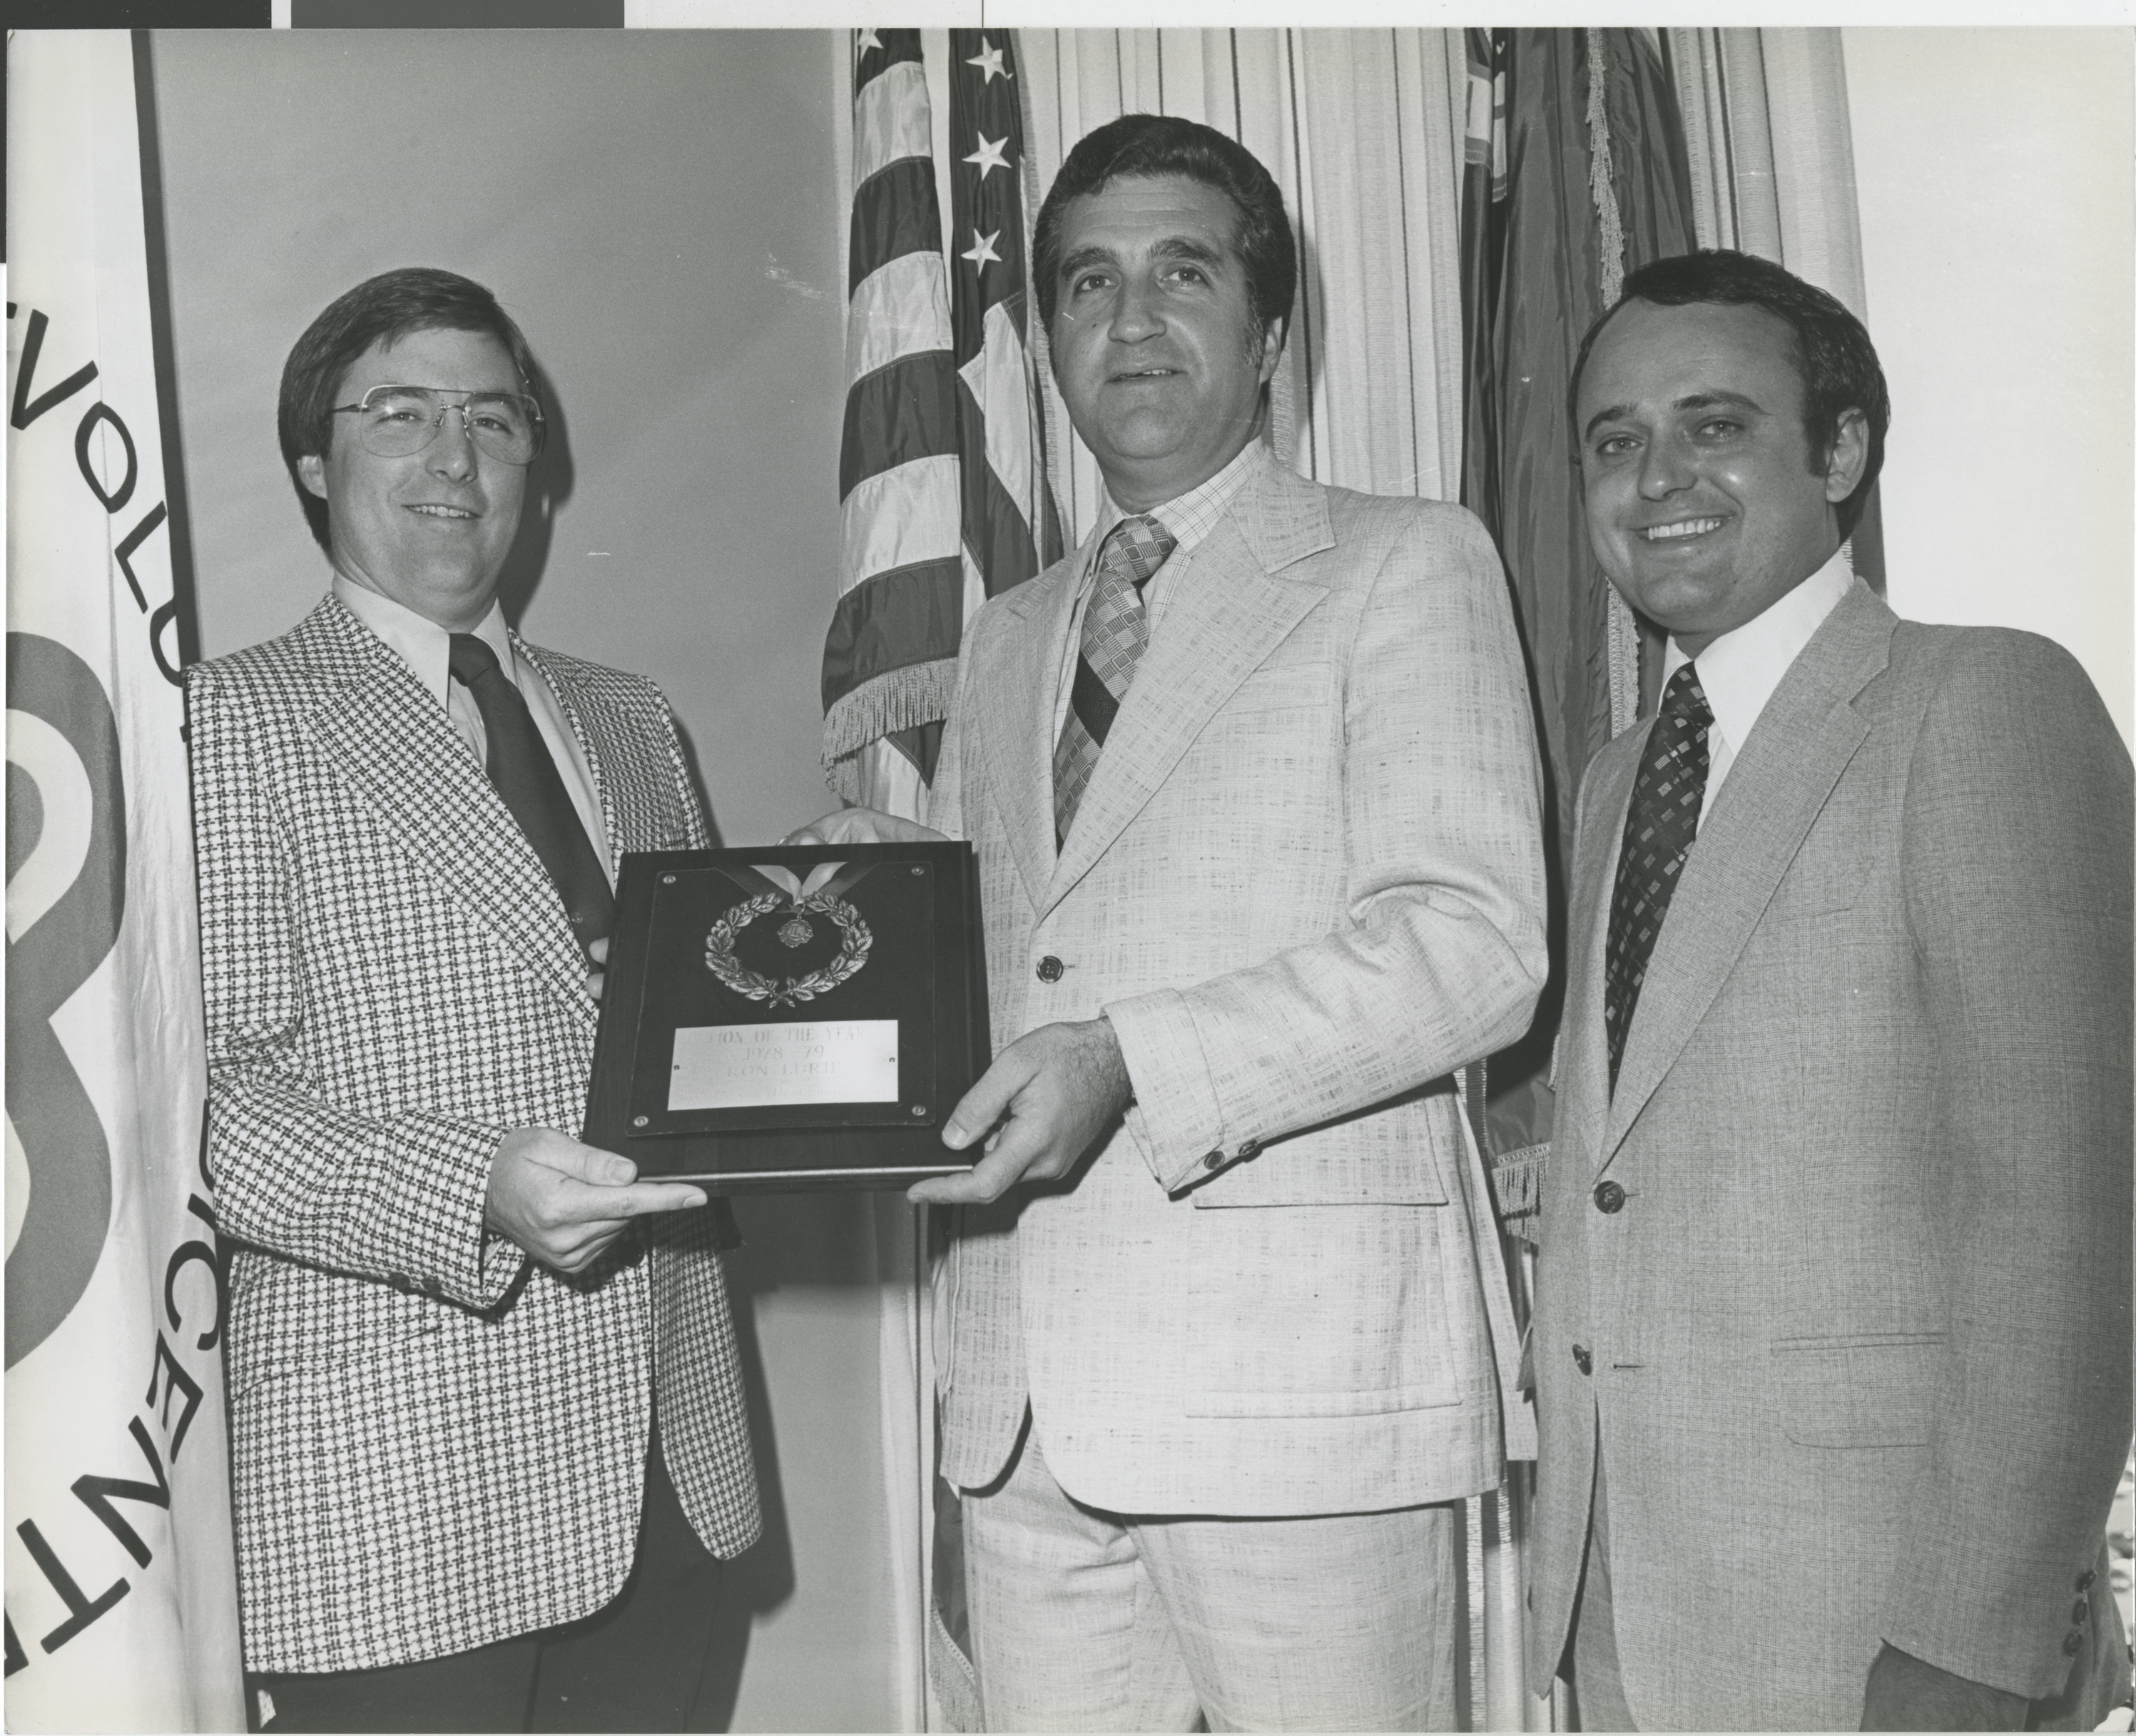 Photograph of Ron Lurie receiving Lion of the Year plaque, 1978-1979